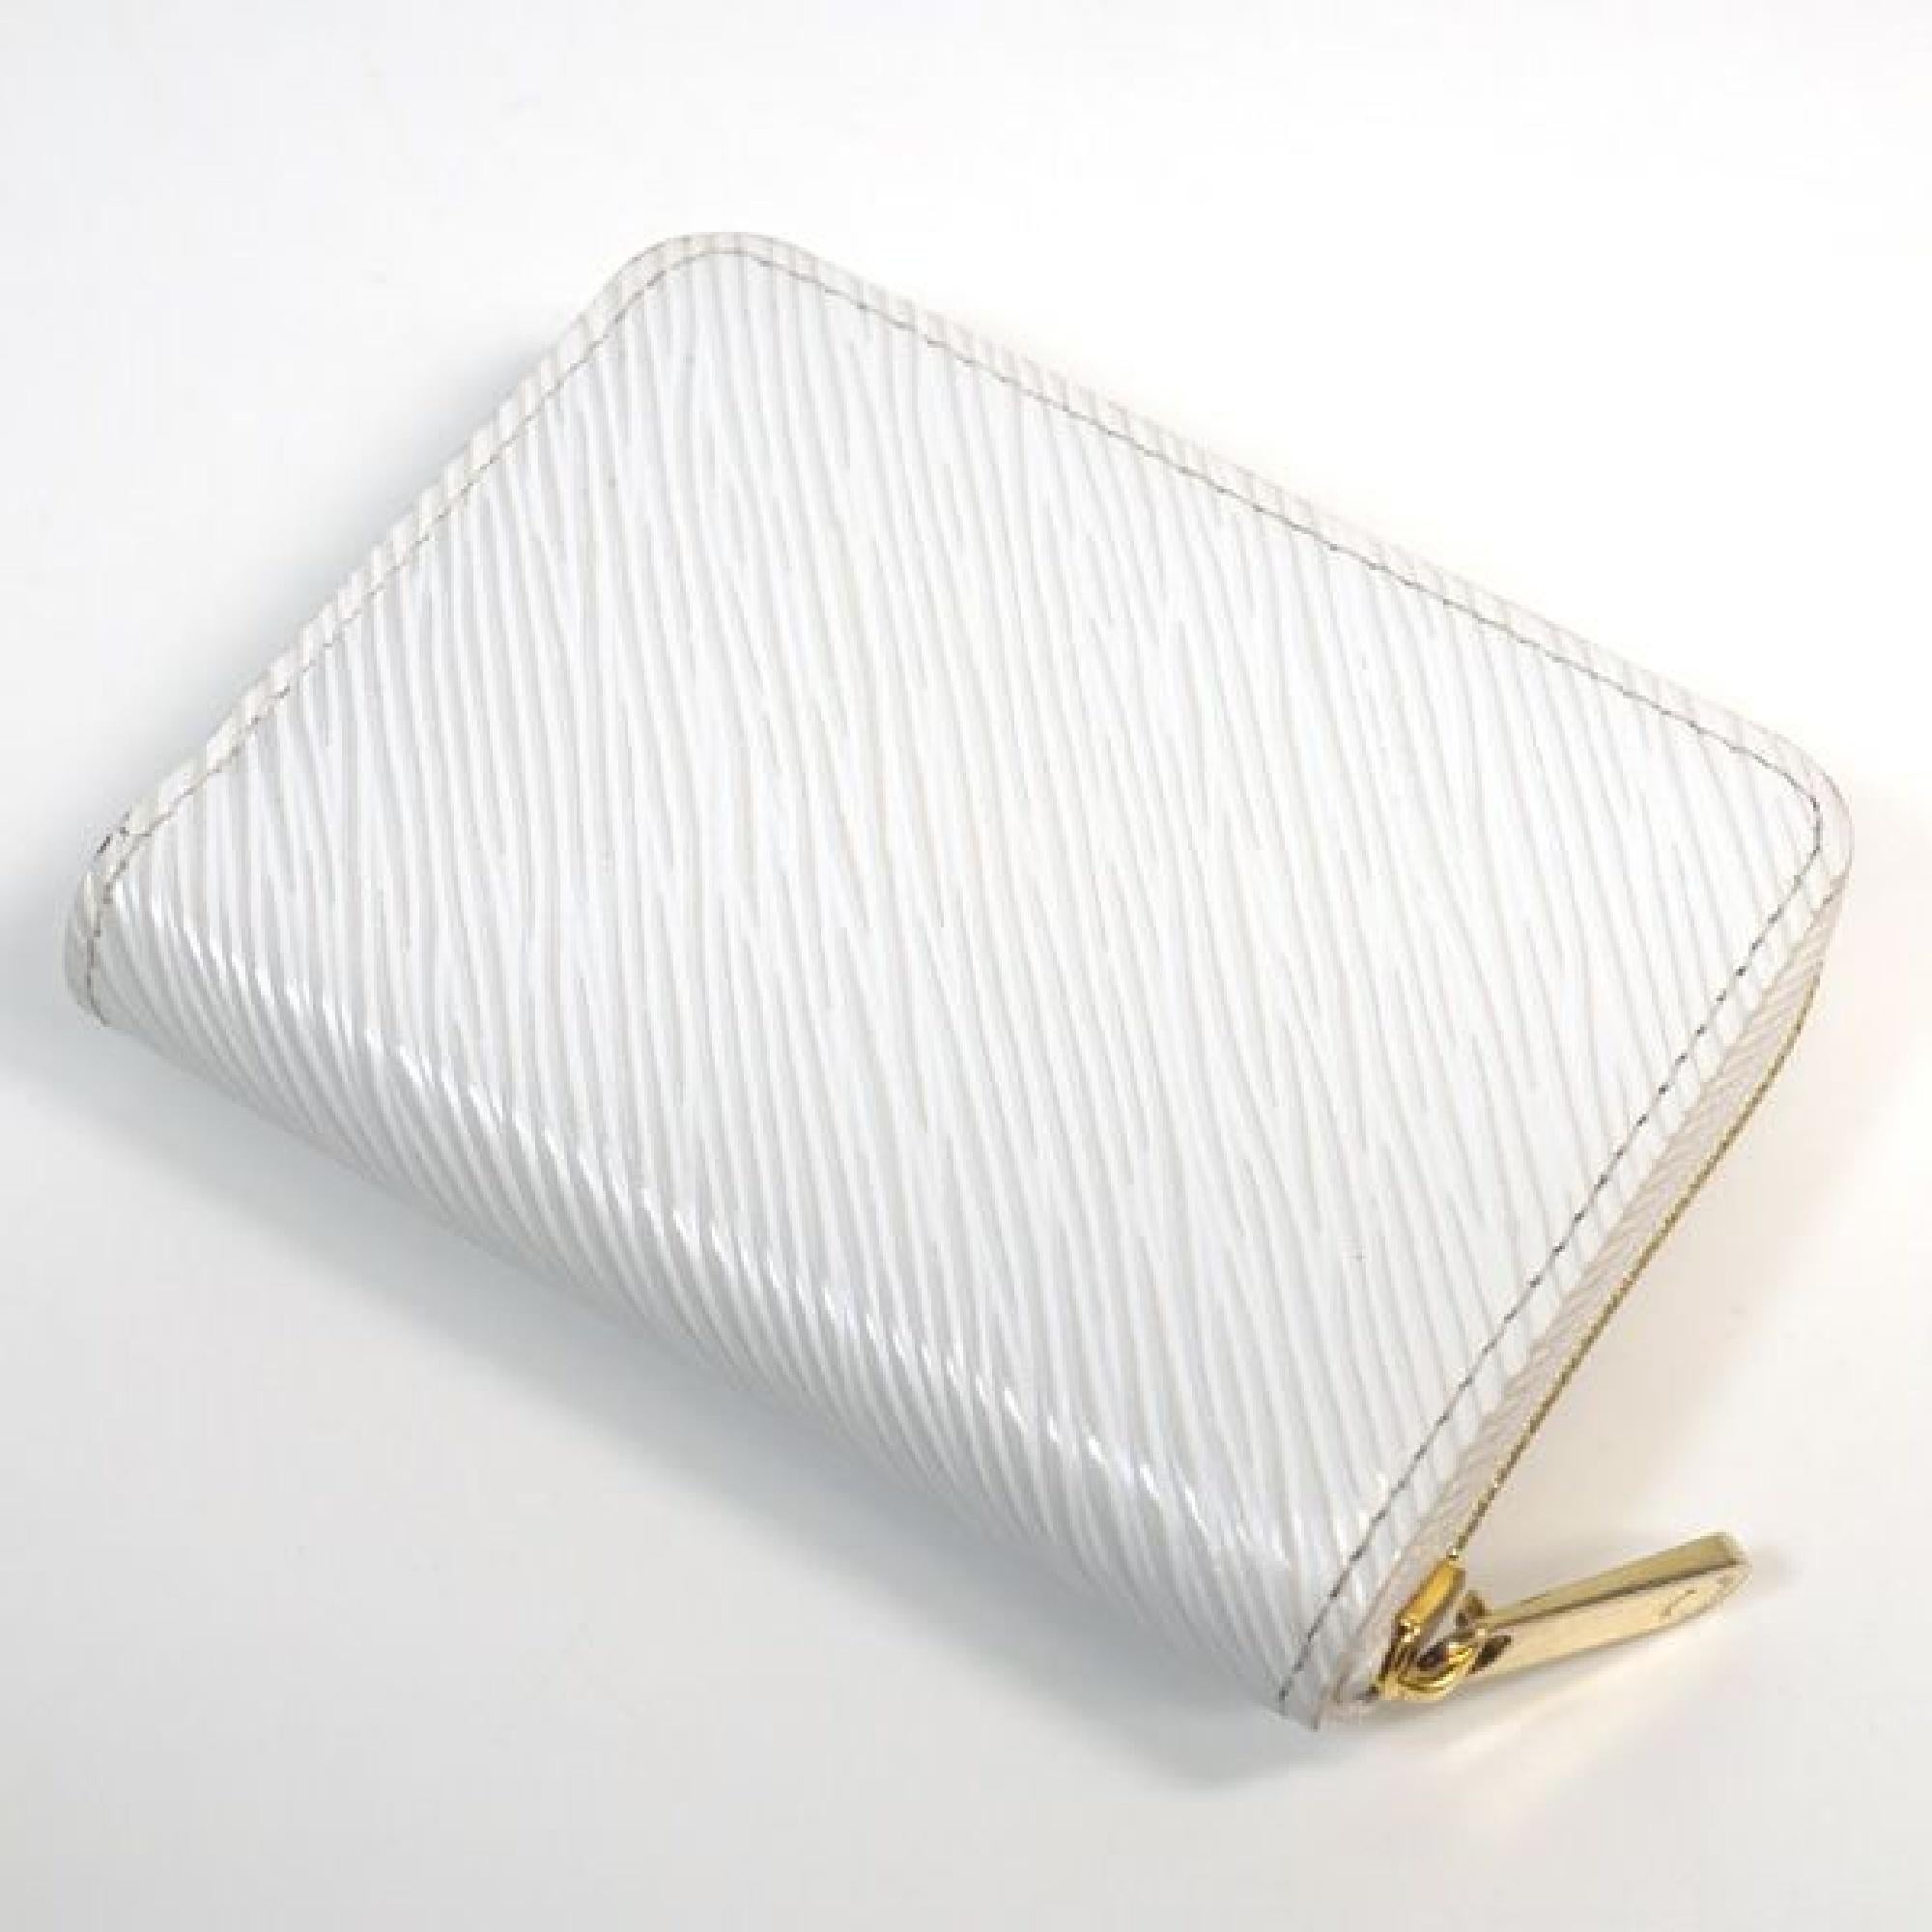 An authentic LOUIS VUITTON love lock Zippy coin purse unisex coin case M63994 blanc. The color is blanc. The outside material is Epi leather. The pattern is love lock  Zippy coin purse. This item is Contemporary. The year of manufacture would be